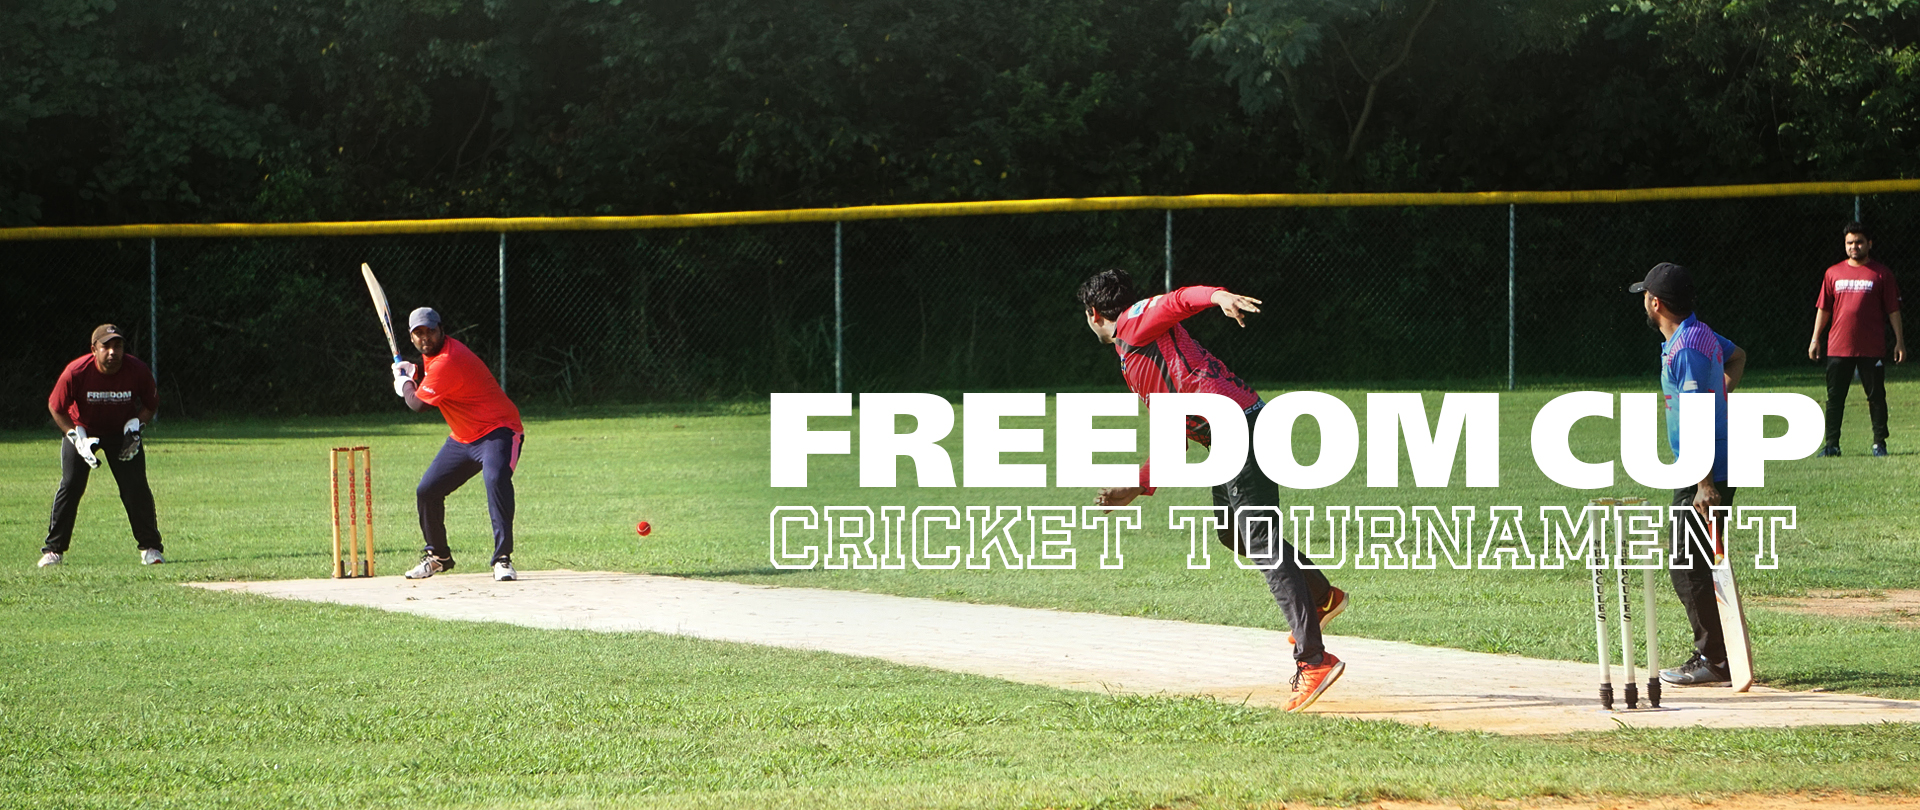 Freedom Cup Cricket
Saturdays, July 13 – August 17
Sign up to play on the Calvary team!
